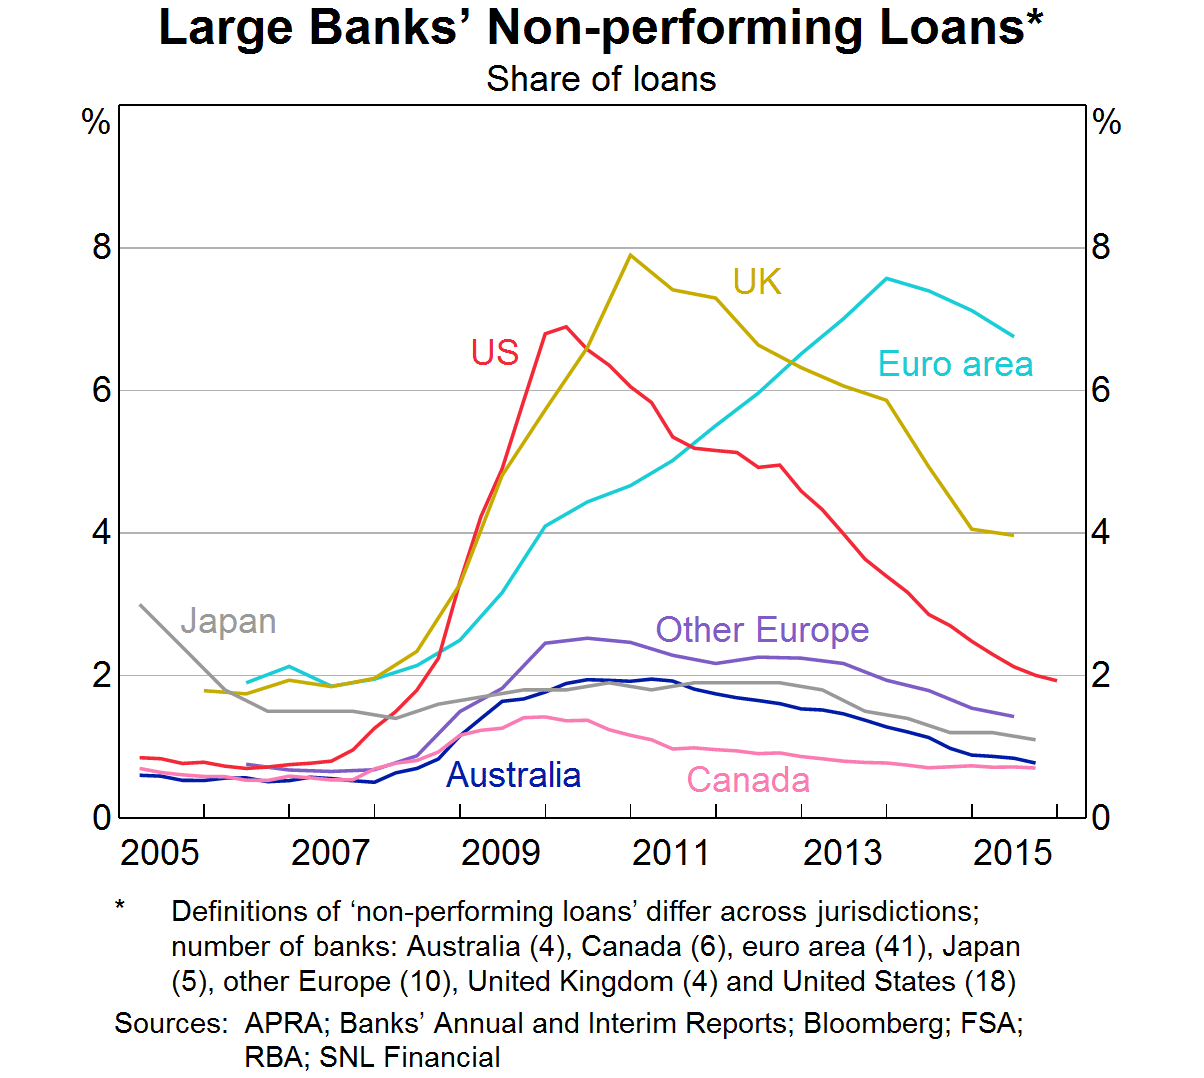 Large Banks' Non-Performing Loans